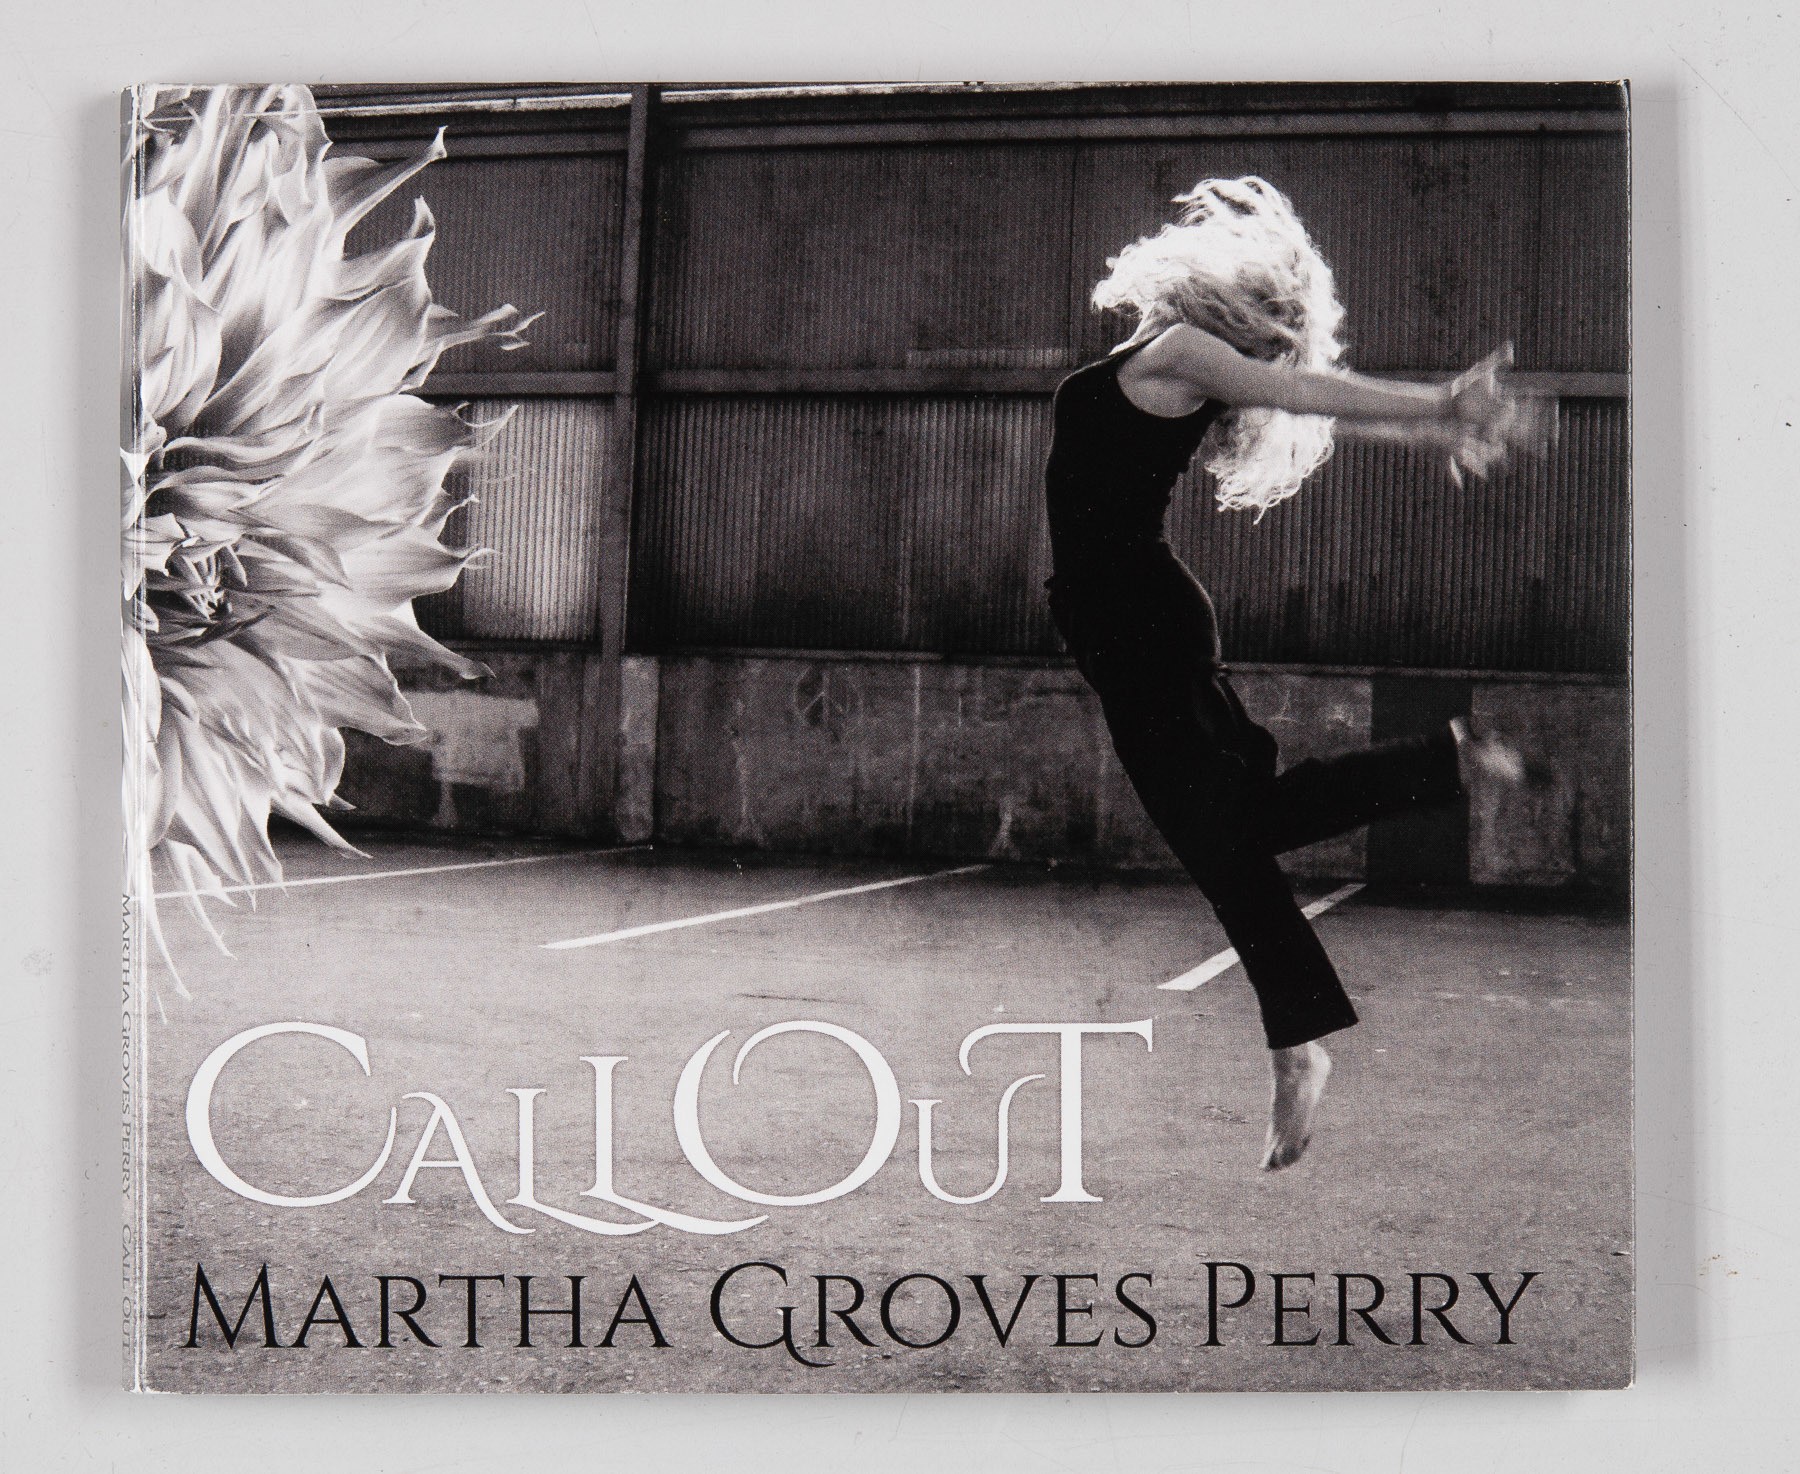 Martha Groves Perry: Callout album cover: Front